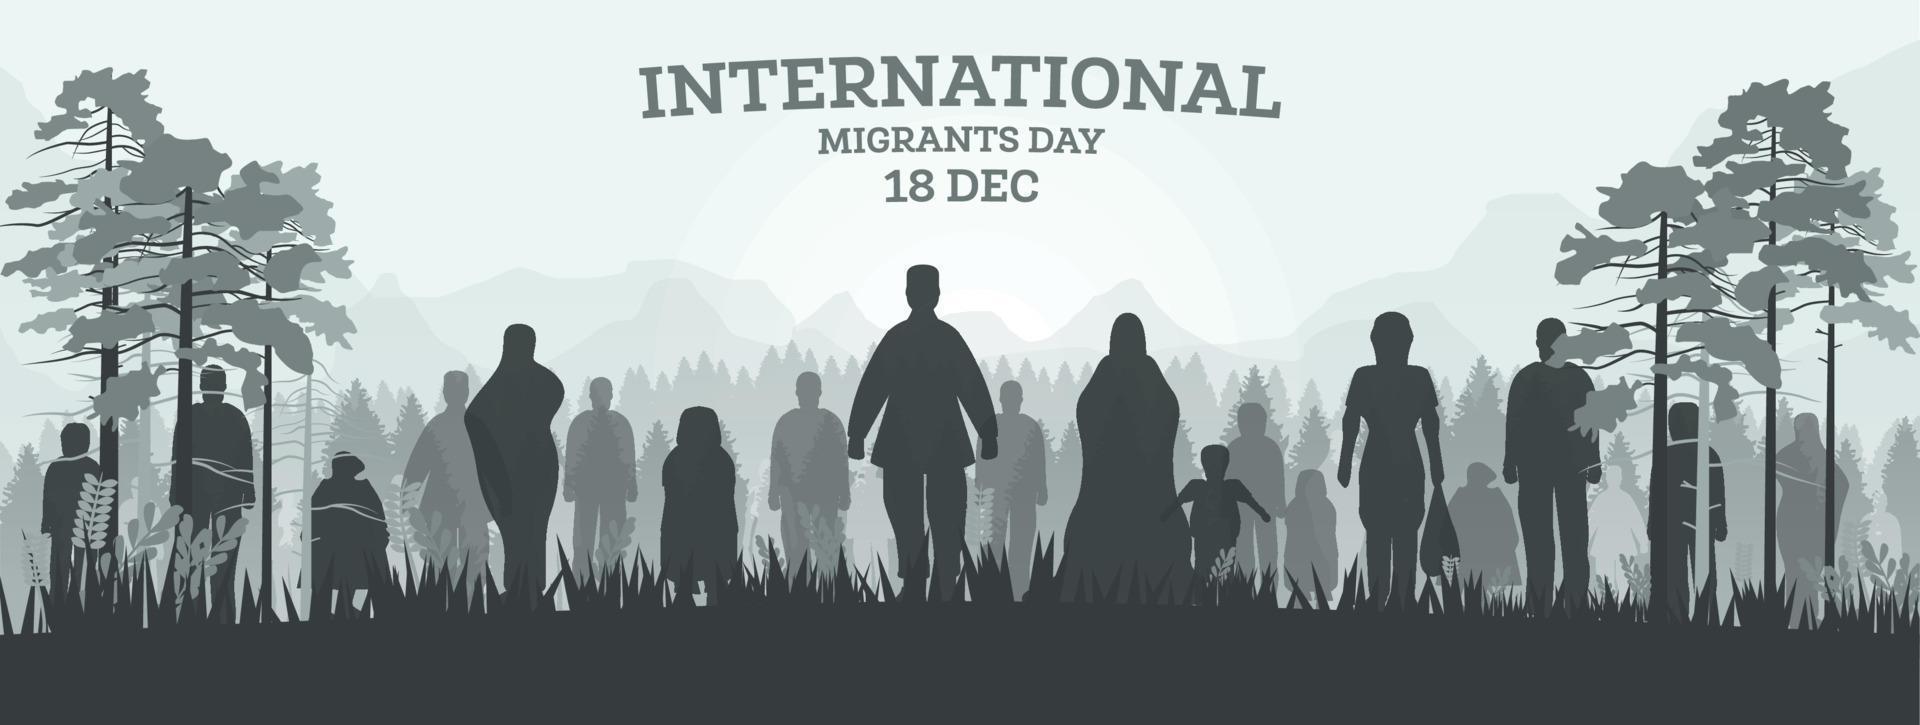 International Migrants Day 18 December. Web Banner with Silhouettes of Refugee in Forest. vector